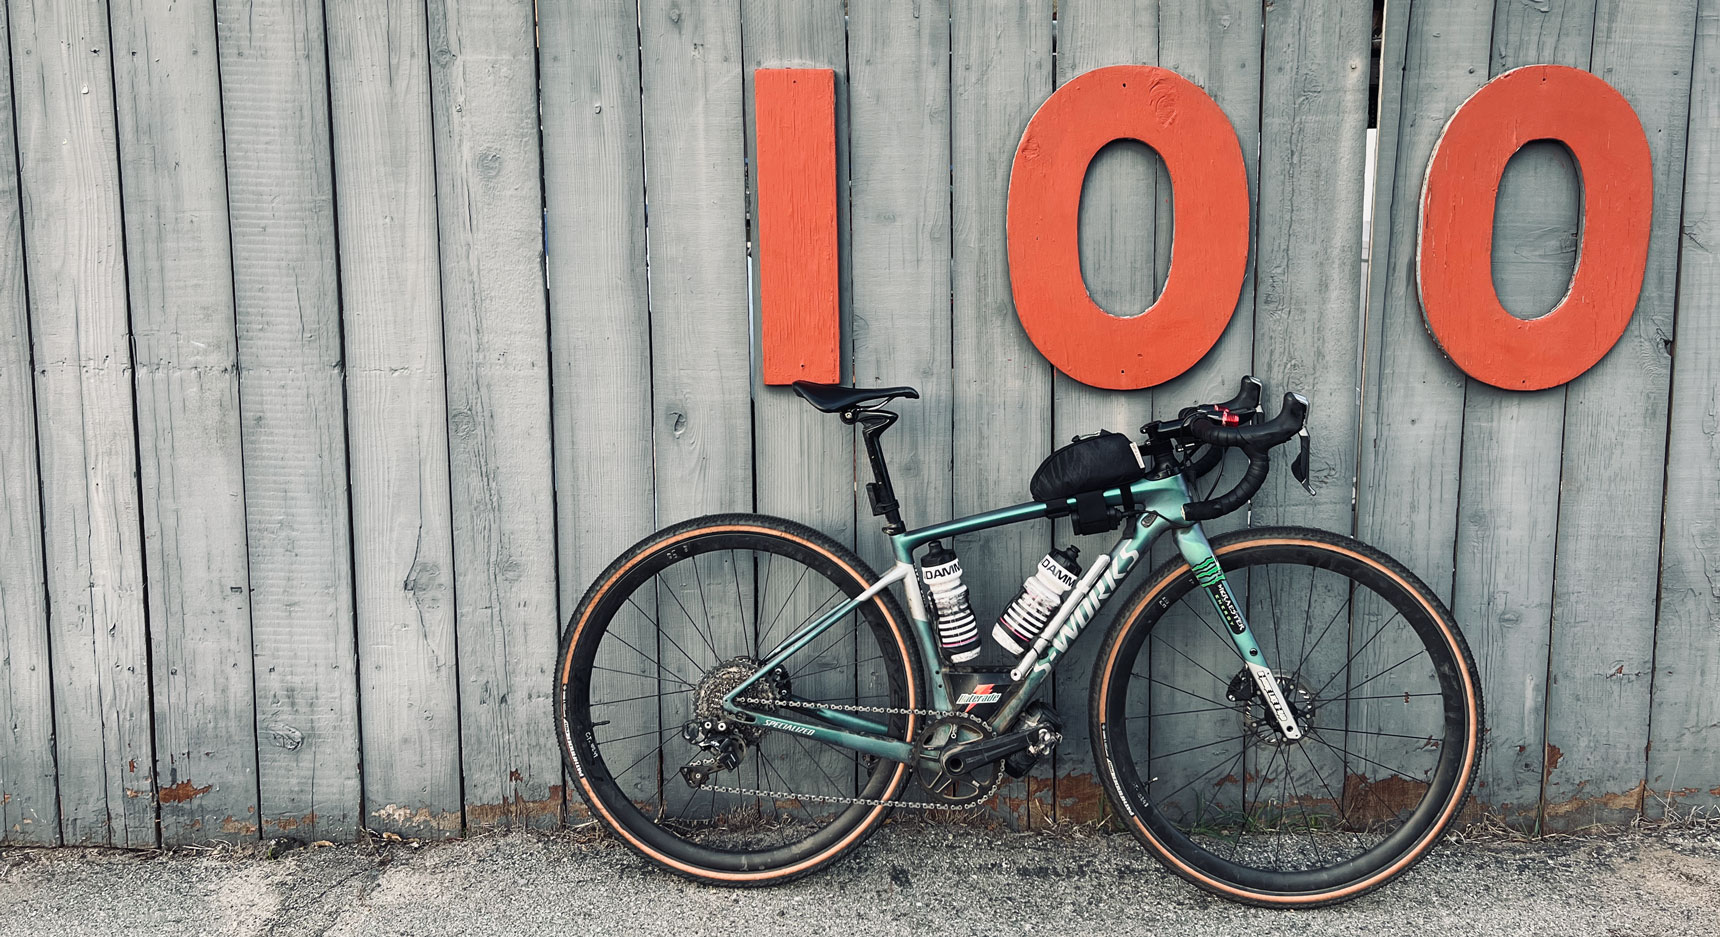 Bicycle leaning against a wall with large 100 address numbers.